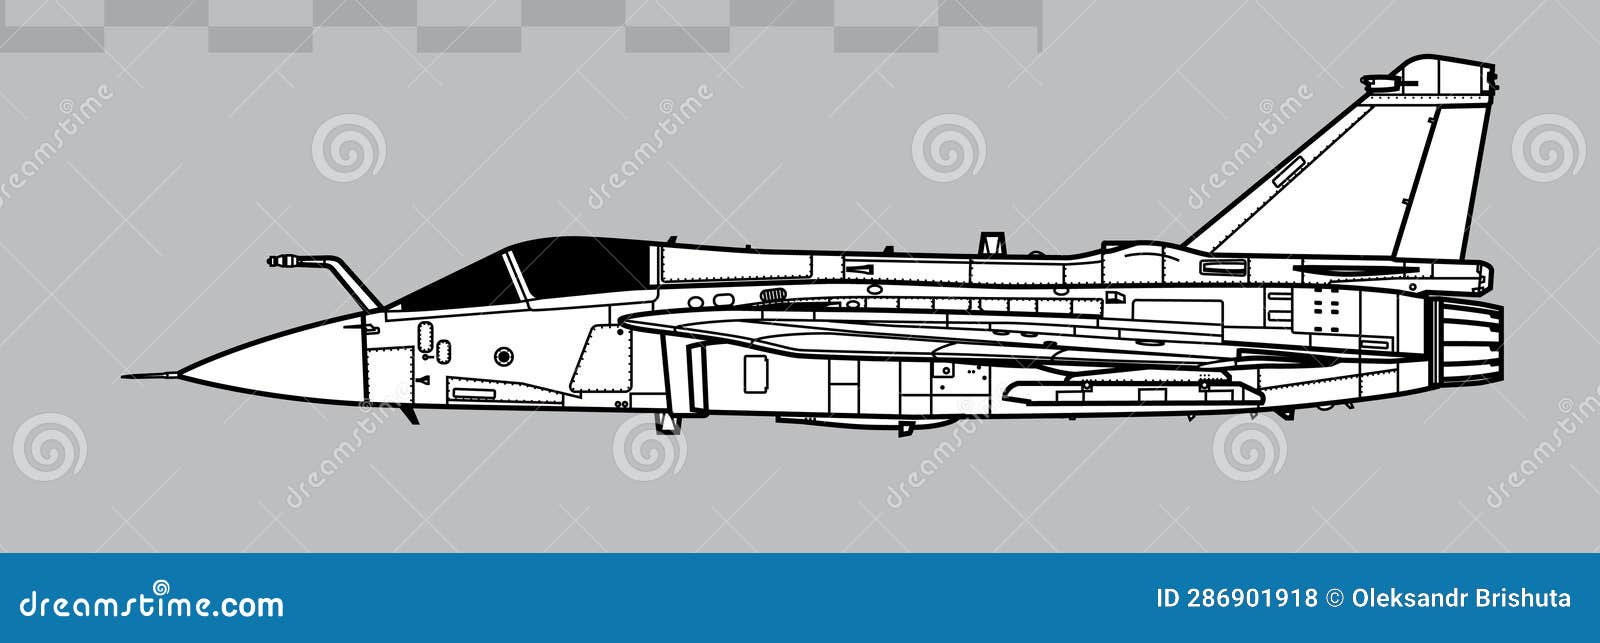 hal lca tejas mark 1a.  drawing of multirole light fighter.